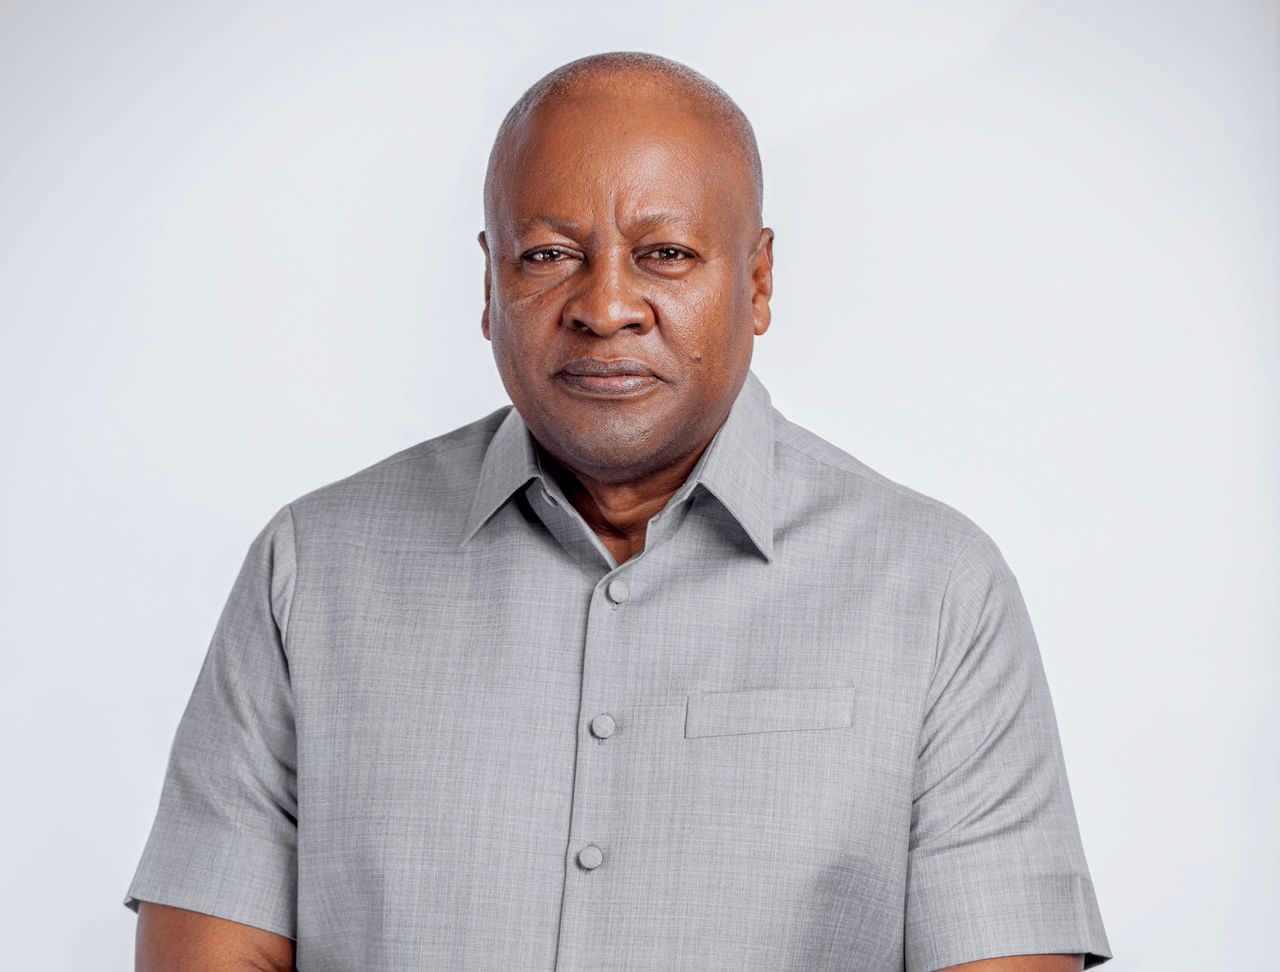 Mahama: I'll amend constitution to allow dual citizens to be Parliament